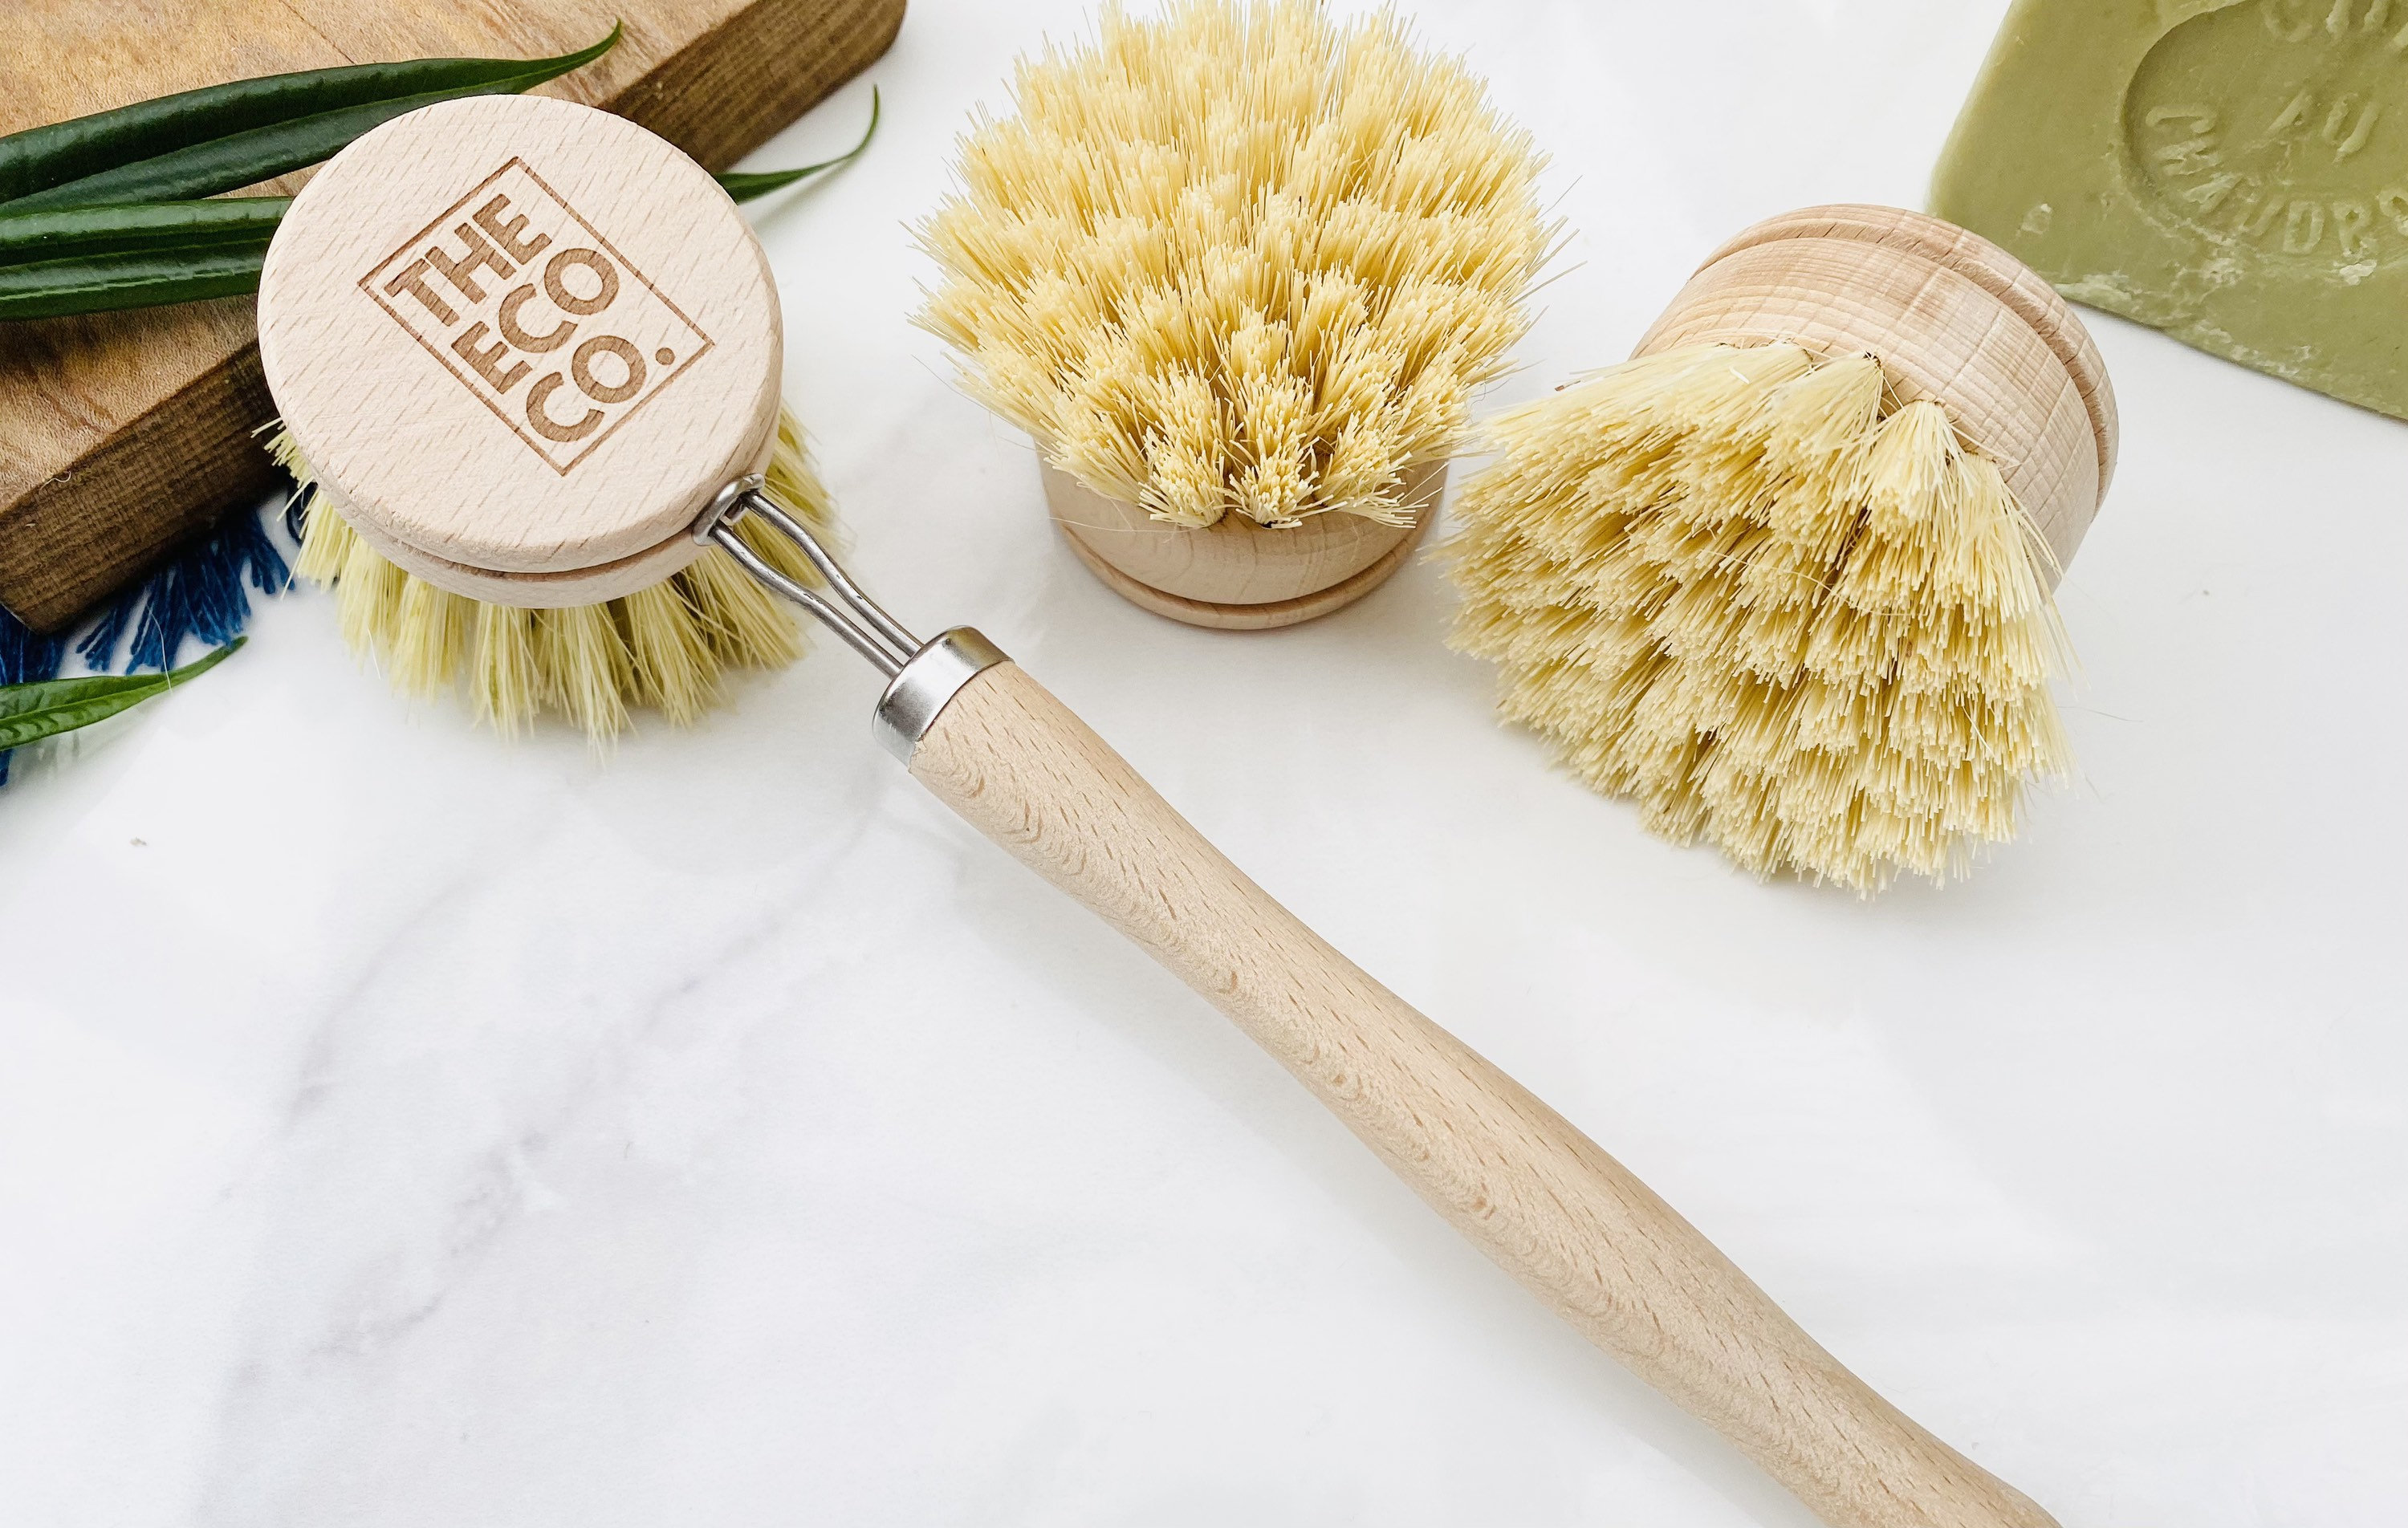 Wooden Pot Brush - Peace With The Wild